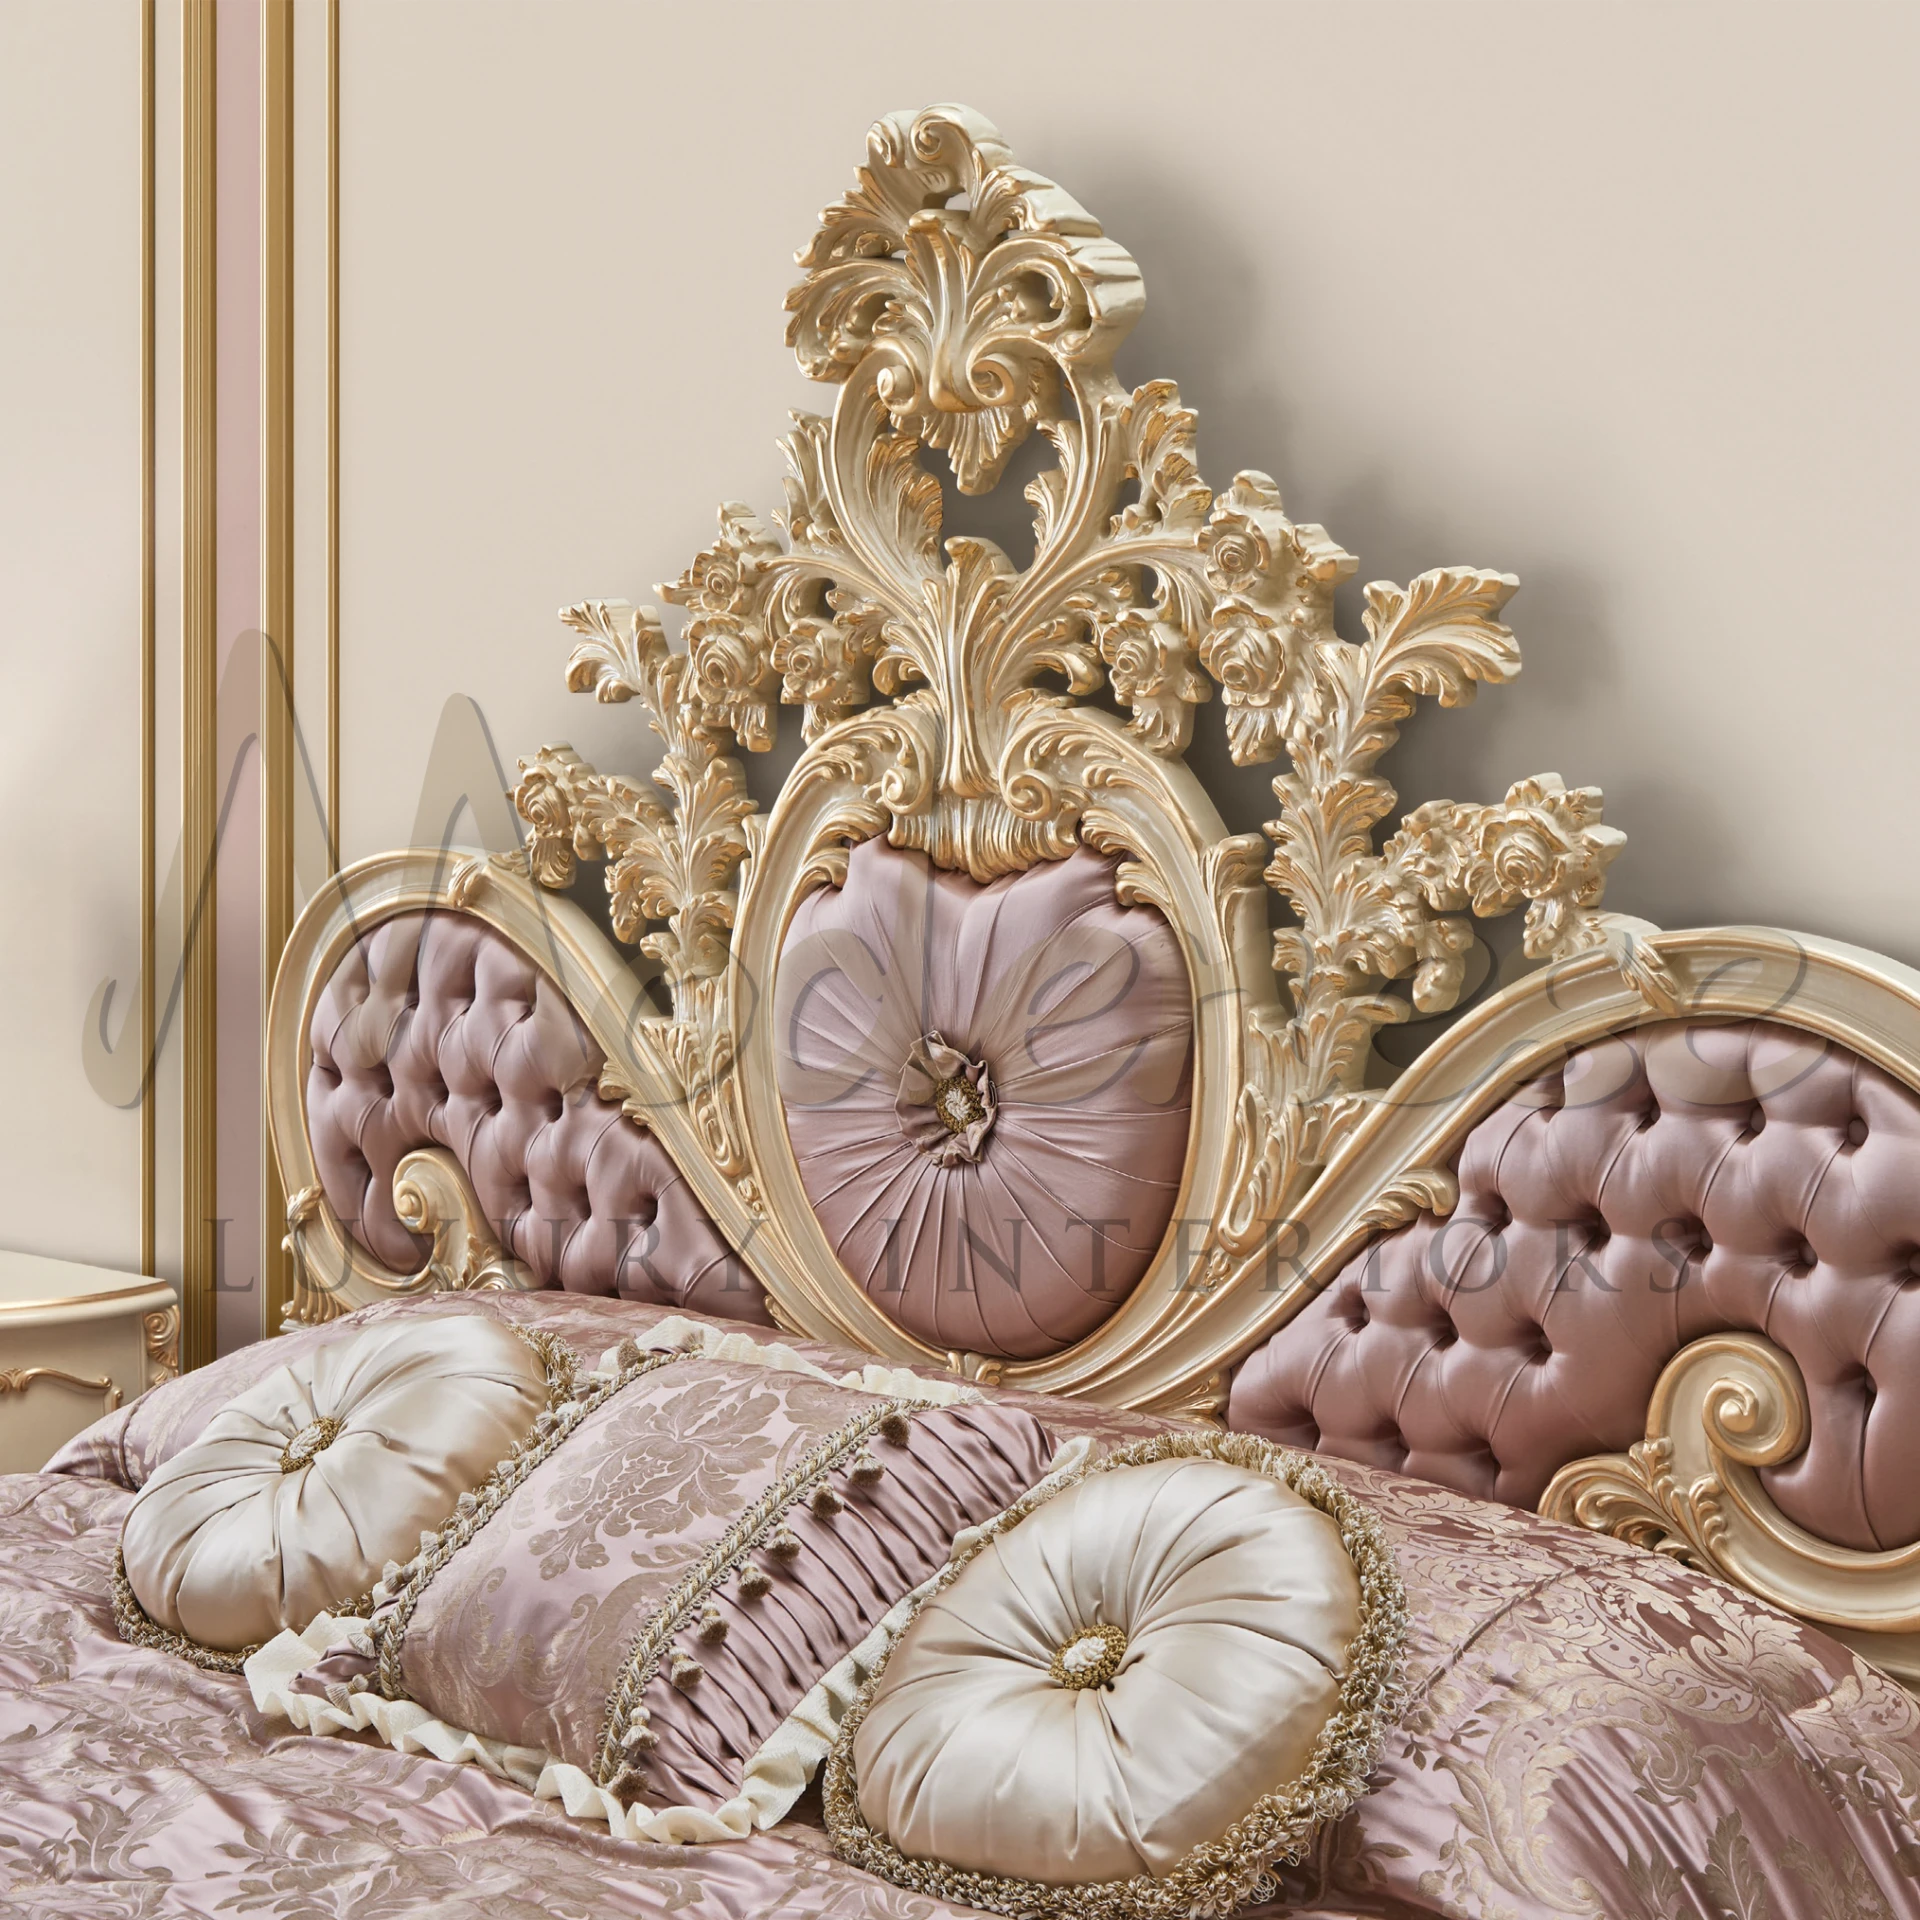 Elegant Traditional Luxury Pillow as a striking accent on an armchair, showcasing timeless style and refined elegance.